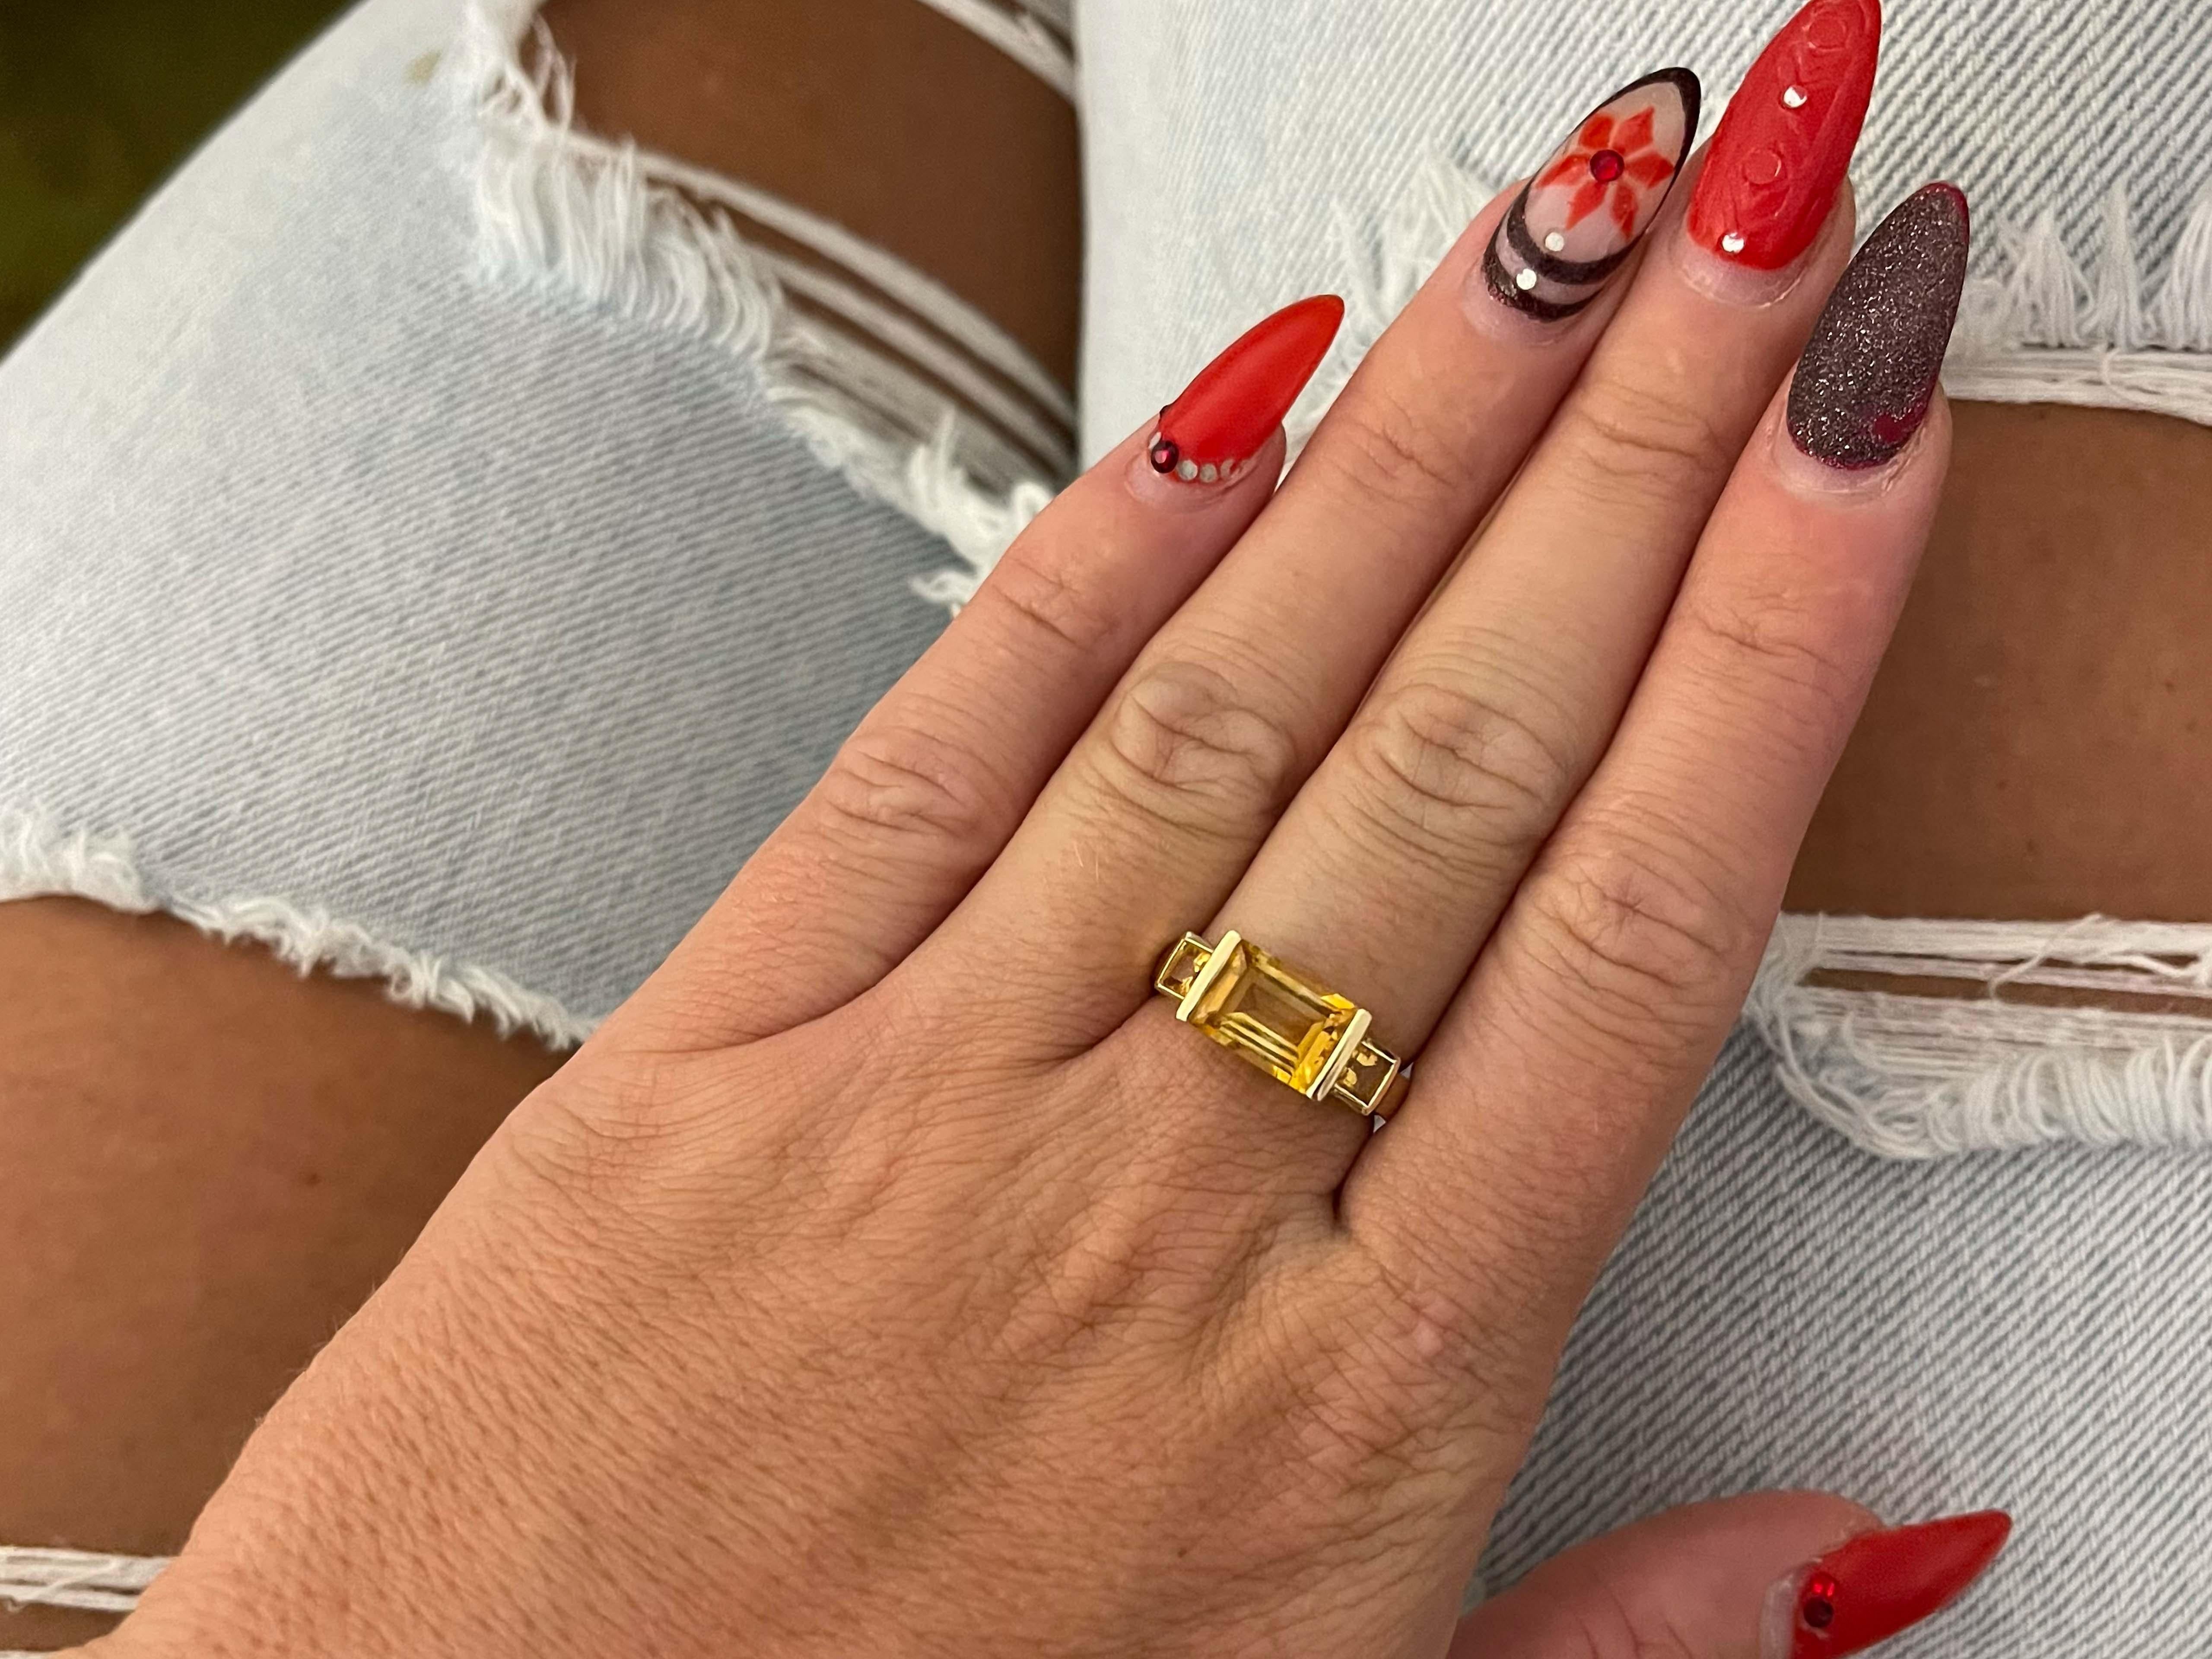 Item Specifications:

Metal: 14k Yellow Gold

Style: Statement Ring

Ring Size: 7 (resizing available for a fee)

Total Weight: 5 Grams

Gemstone Specifications: Citrine 

Center Gemstone Measurements: 11.8 mm x 7mm x 5 mm

Color: Golden Yellow